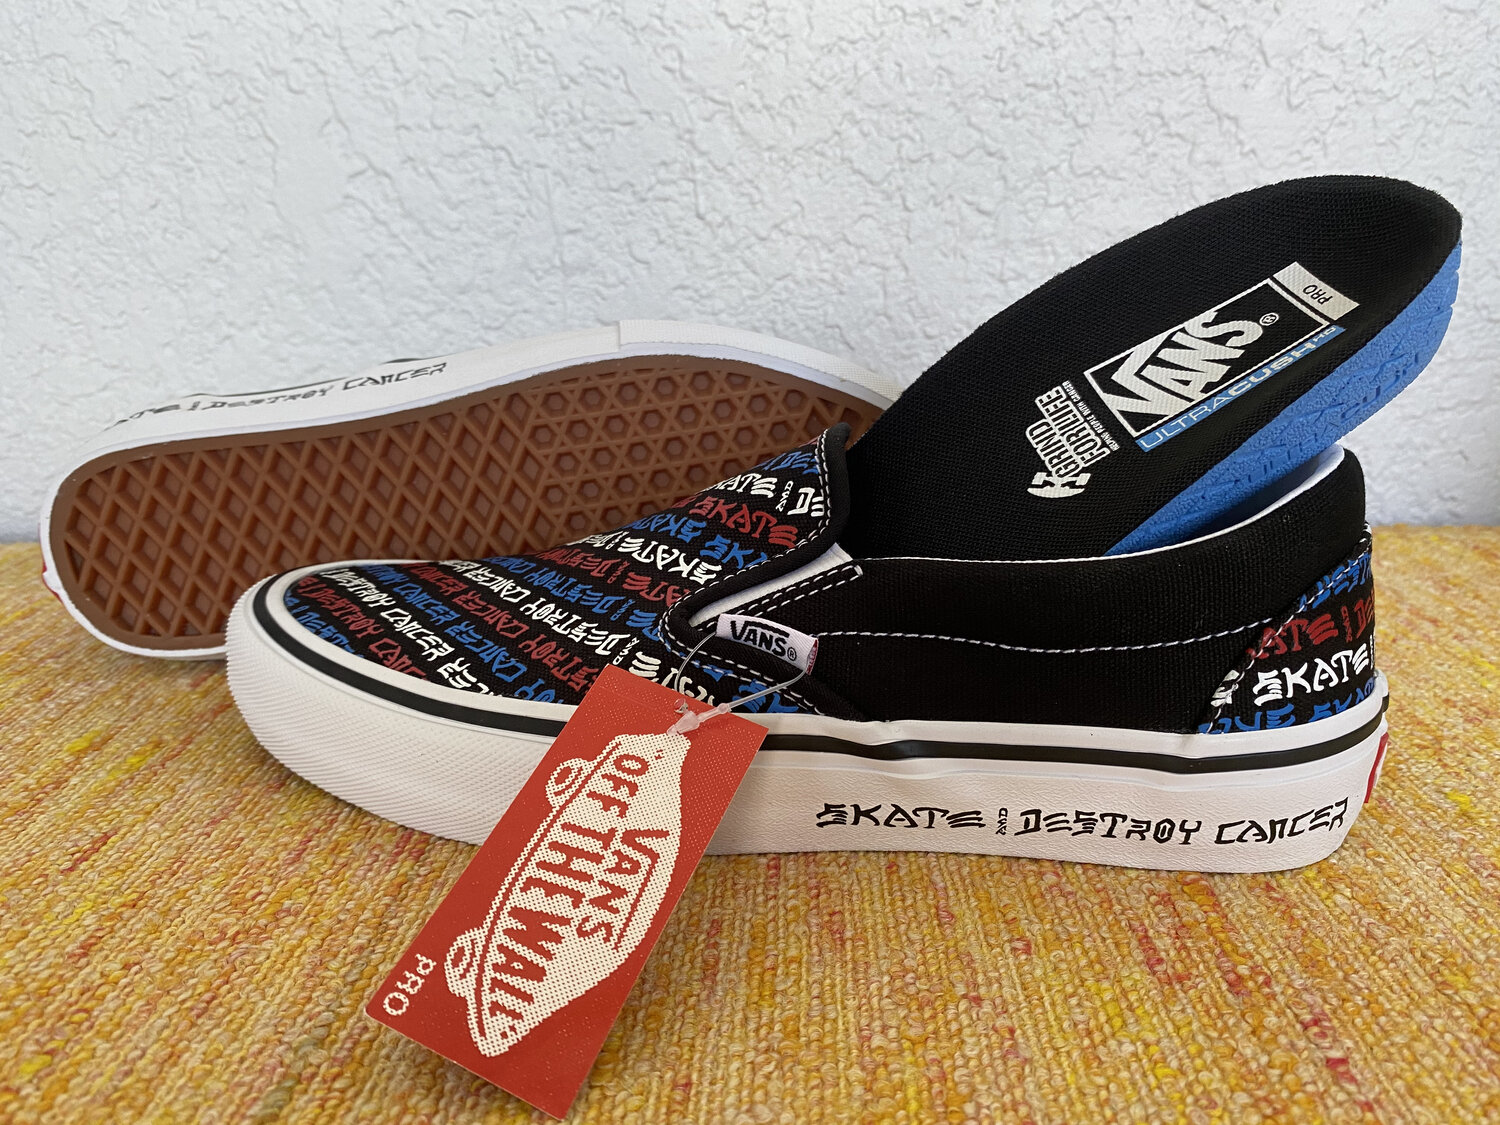 Suburb Pedagogy Municipalities VANS PRO SKATE “SKATE AND DESTROY CANCER” SLIP-ON SHOES WITH ULTRACUSH  INSOLE plus DURACAP — GrindForLife.org